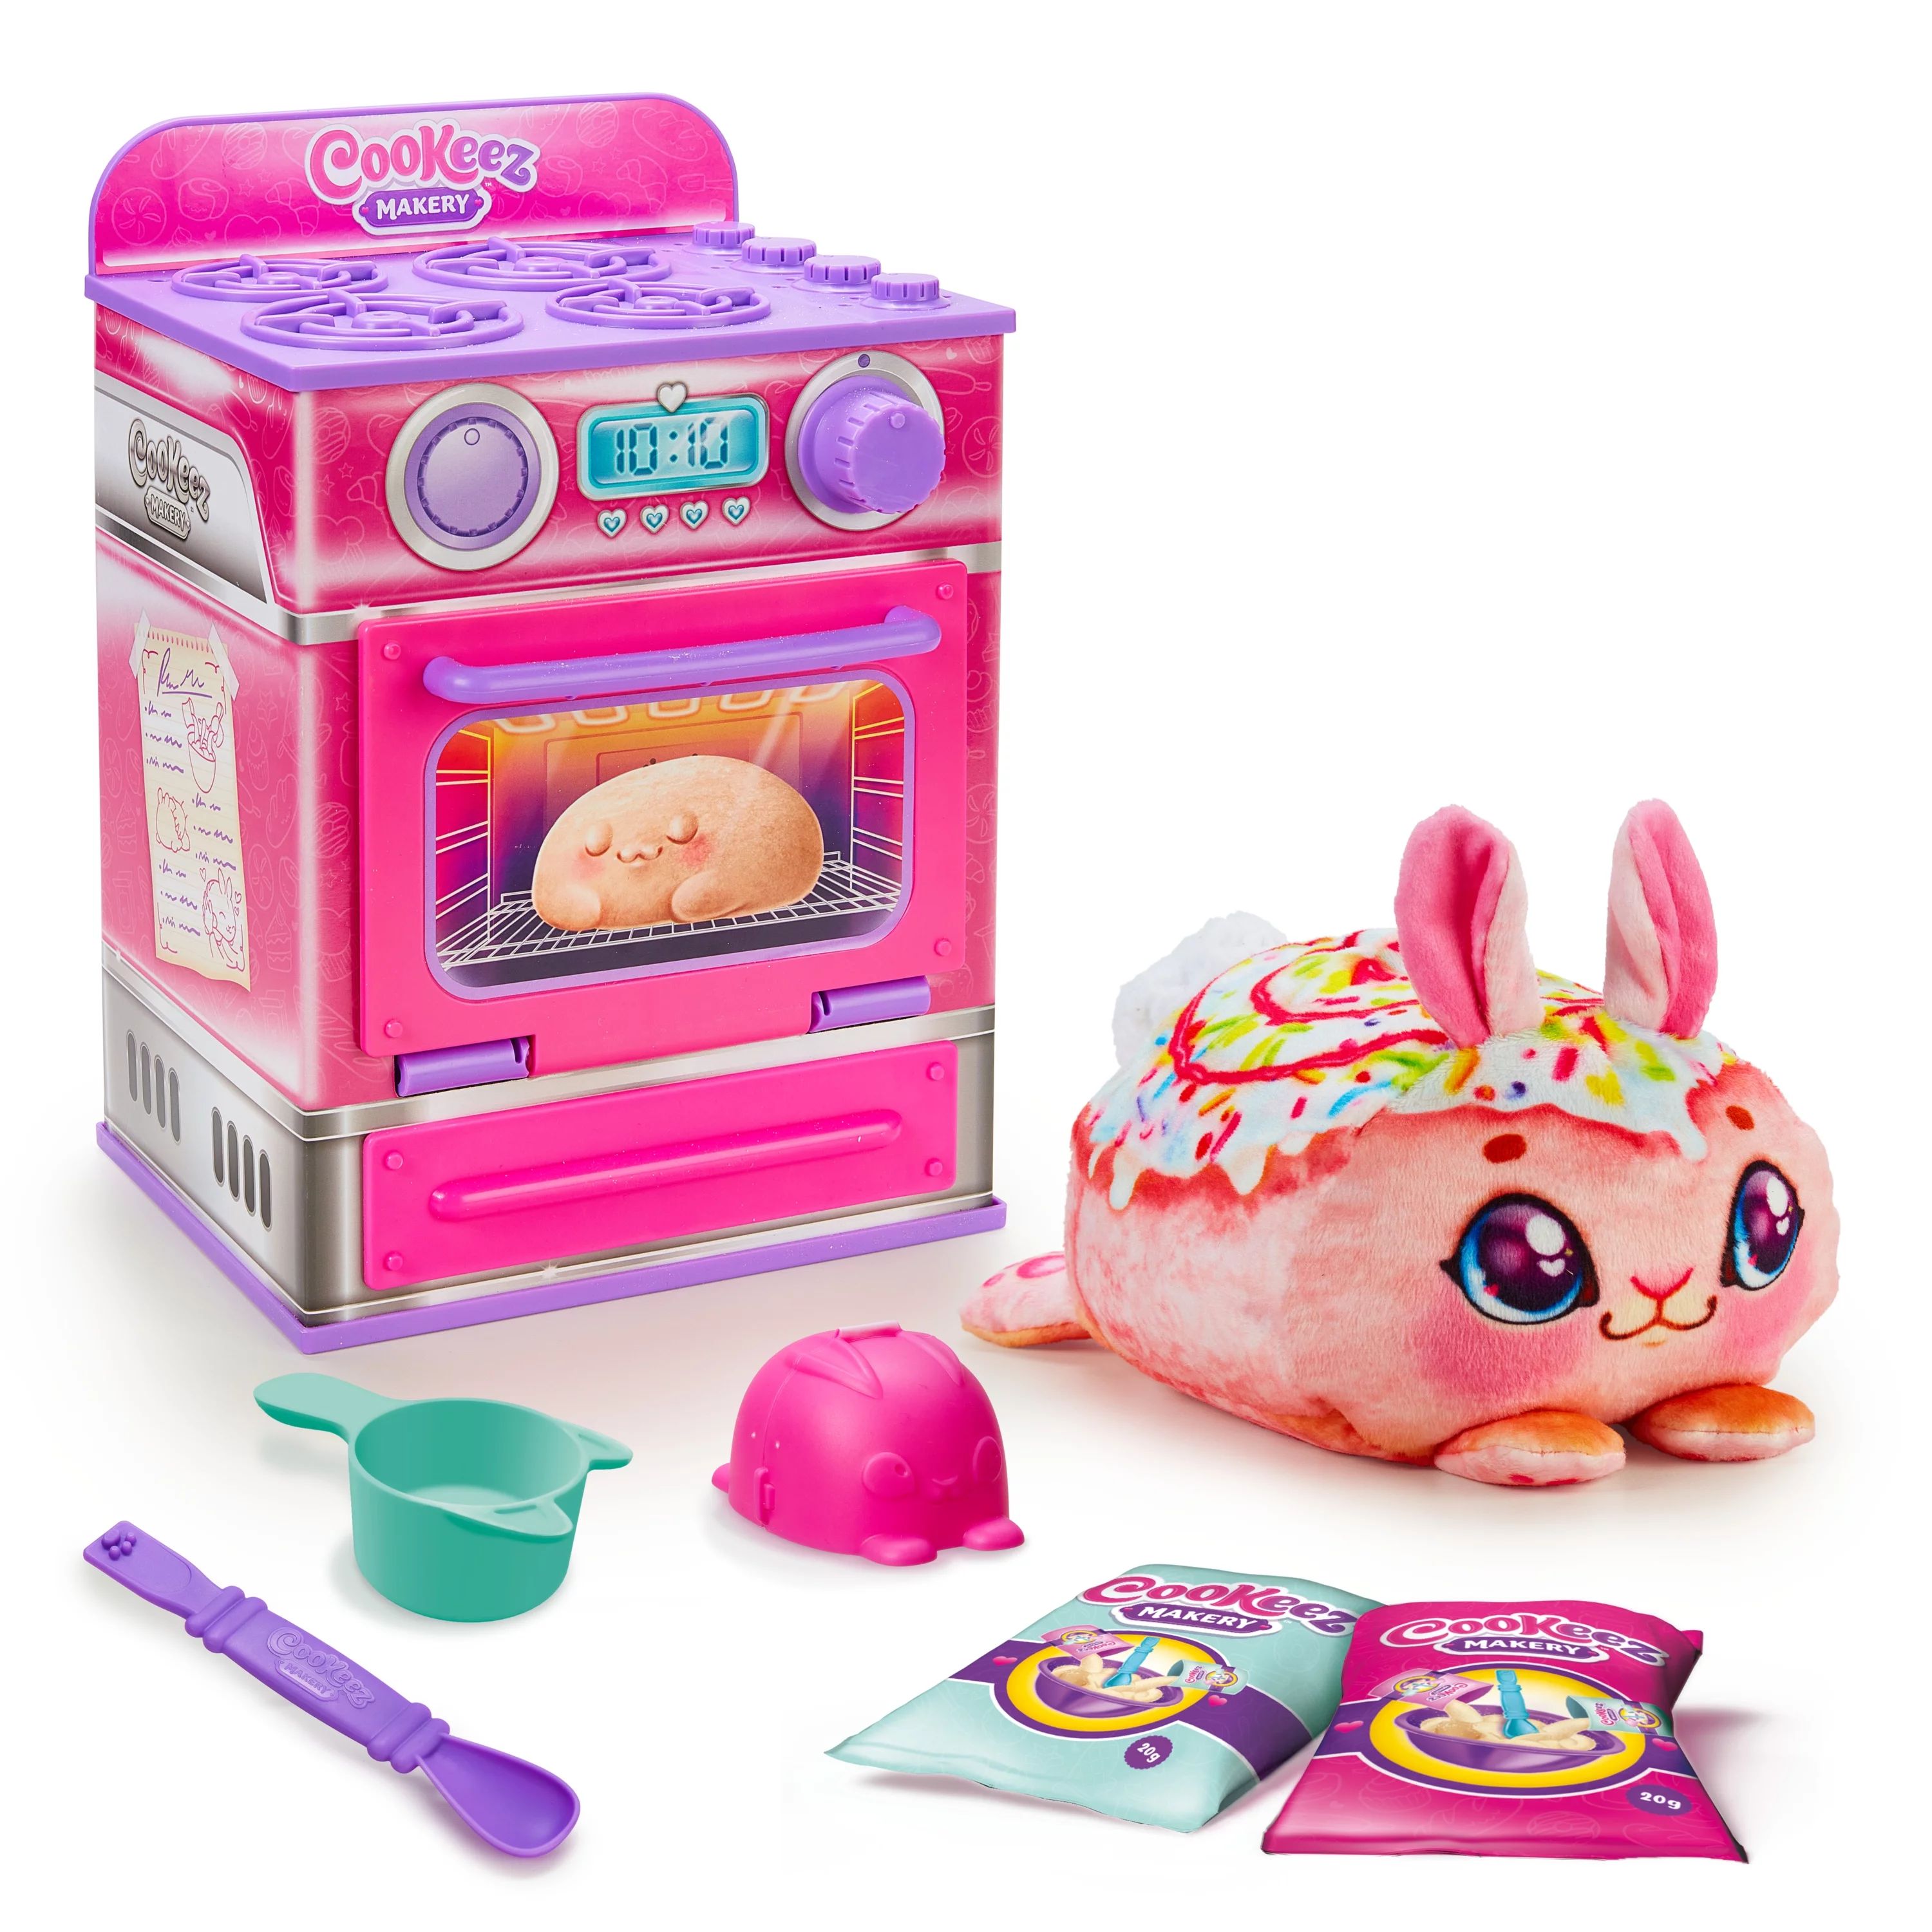 Cookeez Makery Cinnamon Treatz Pink Oven, Scented, Interactive Plush, Styles Vary, Ages 5+ | Walmart (US)